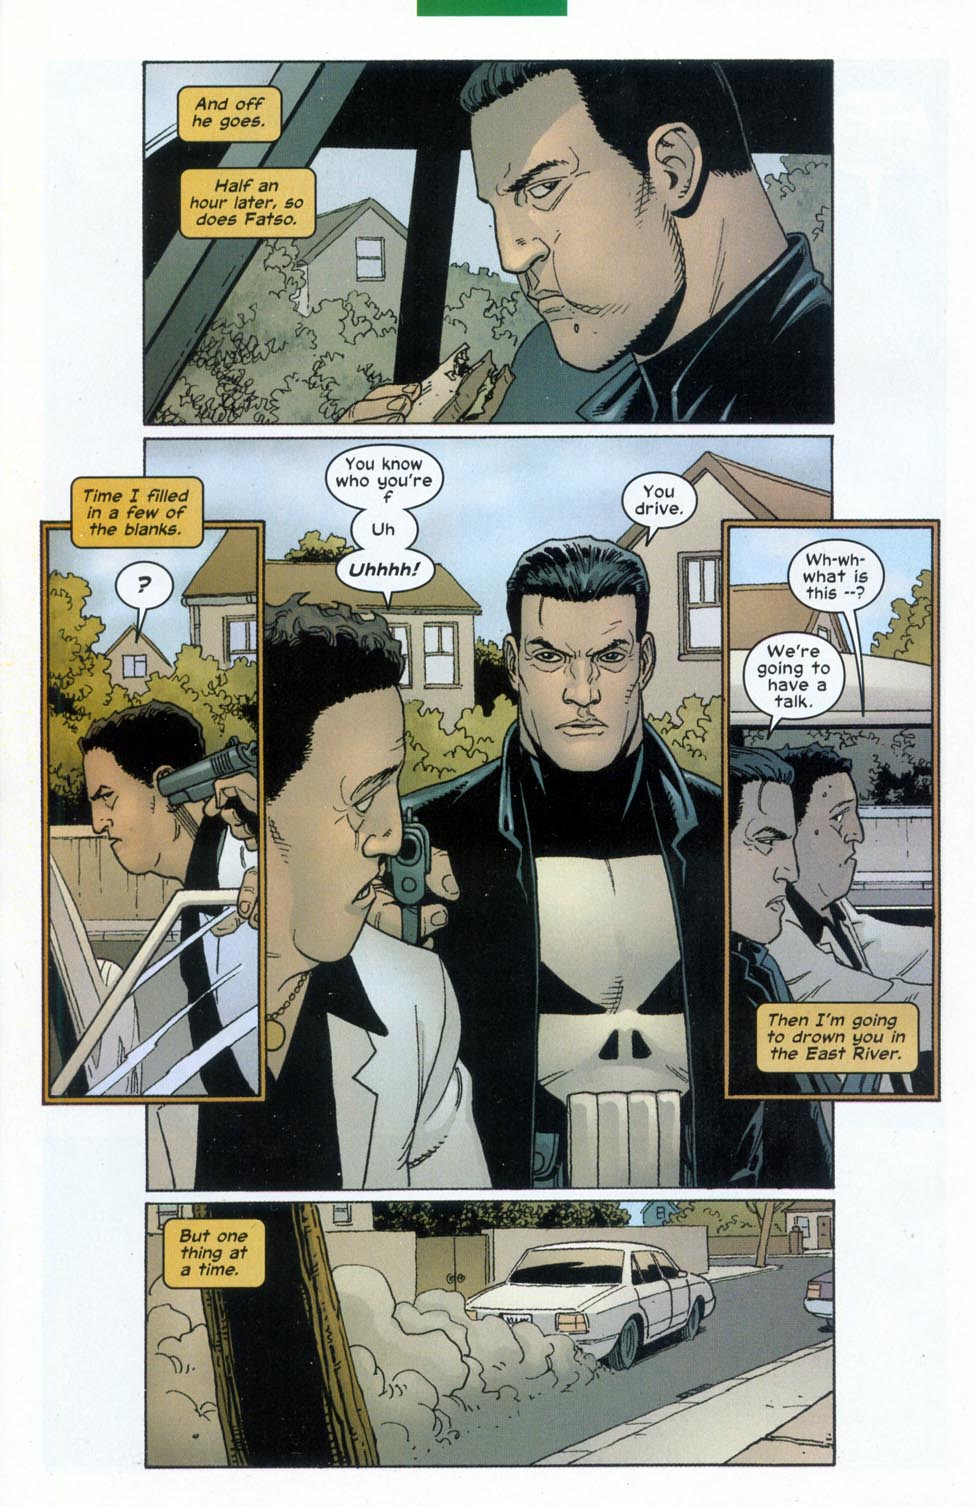 The Punisher (2001) issue 20 - Brotherhood #01 - Page 21